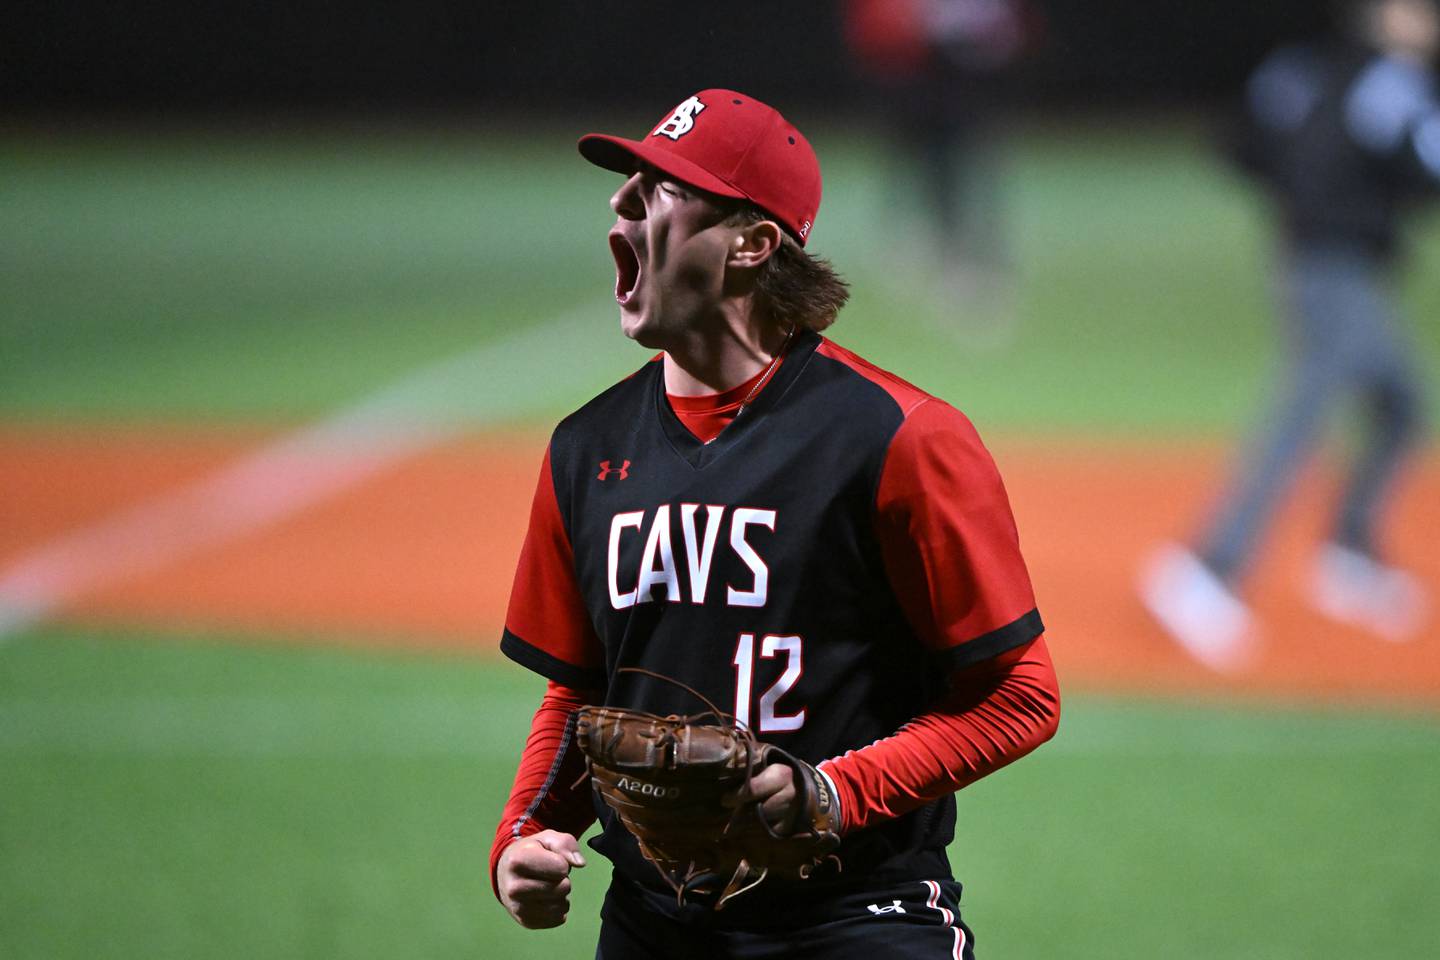 Martin Spalding pitcher Parker Thomas reacts after striking out a Clavert Hall batter with the bases loaded in a High School baseball game Friday, March 24, 2023 in Towson, Md.